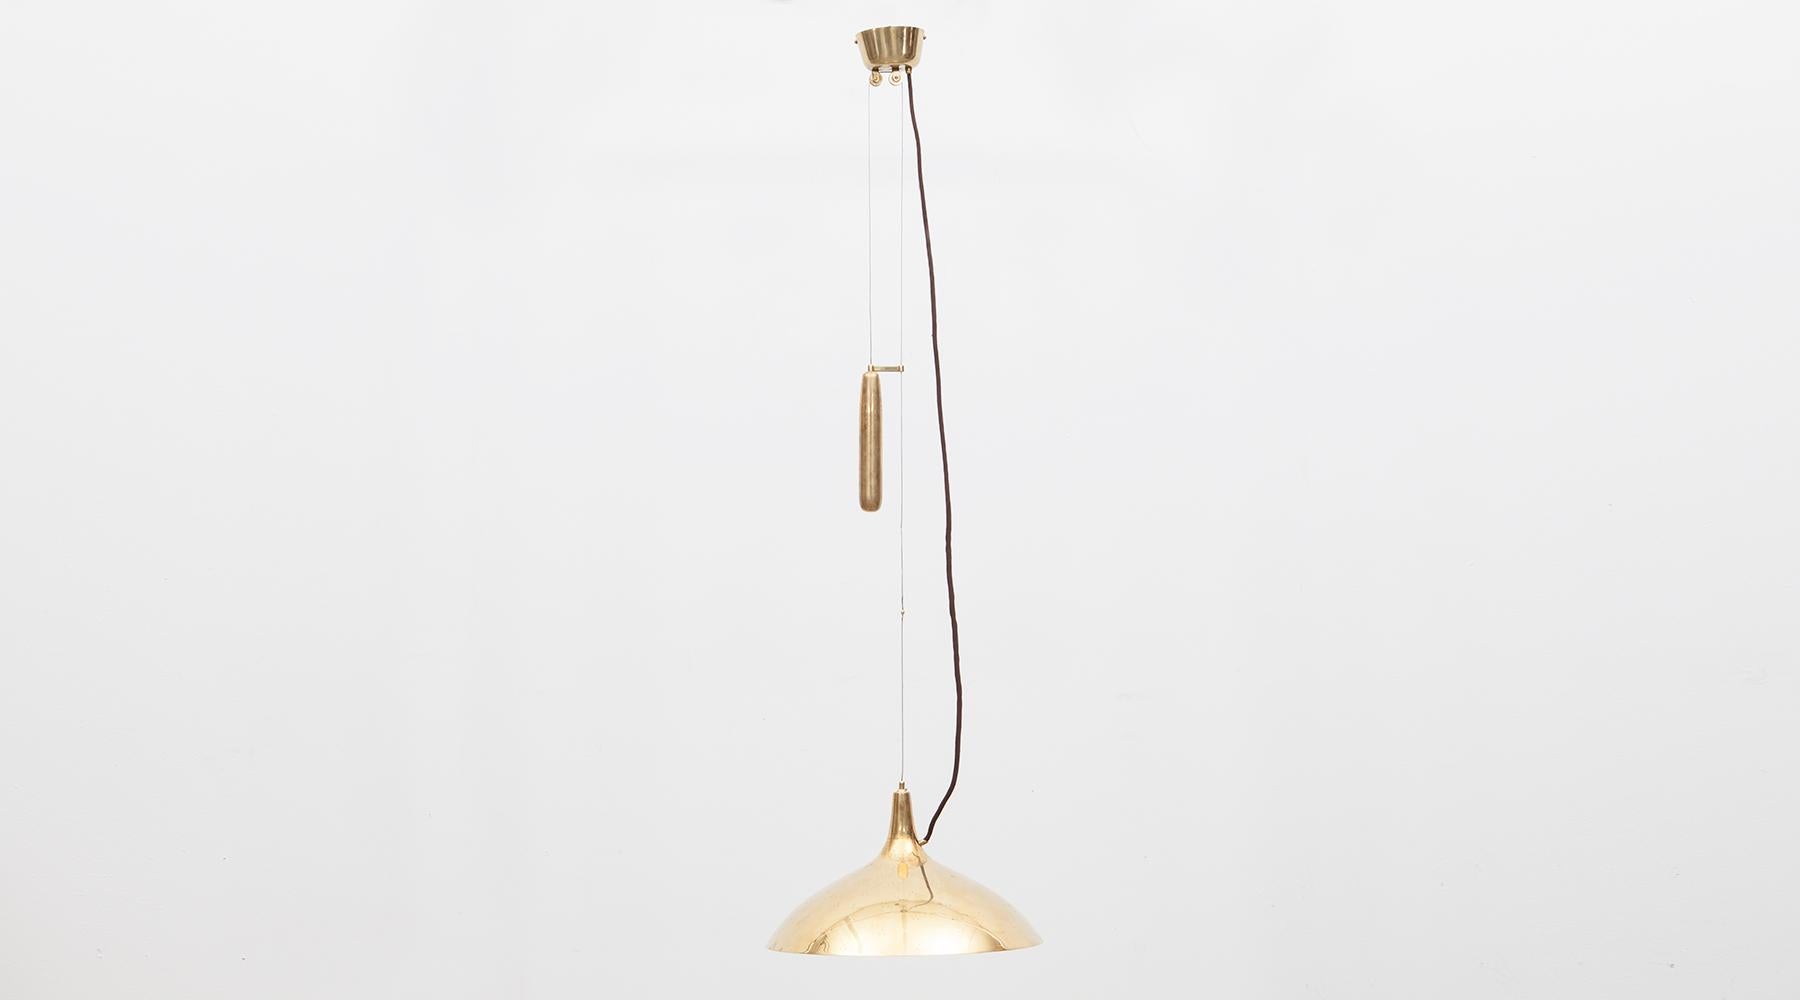 Brass and etched glass, ceiling lamp by Paavo Tynell, Finland, 1965.

Very elegant counterweight pendant designed by famous Finnish Paavo Tynell in brass, tapered with etched glass cover, giving a warm charming light with large brass balance, to